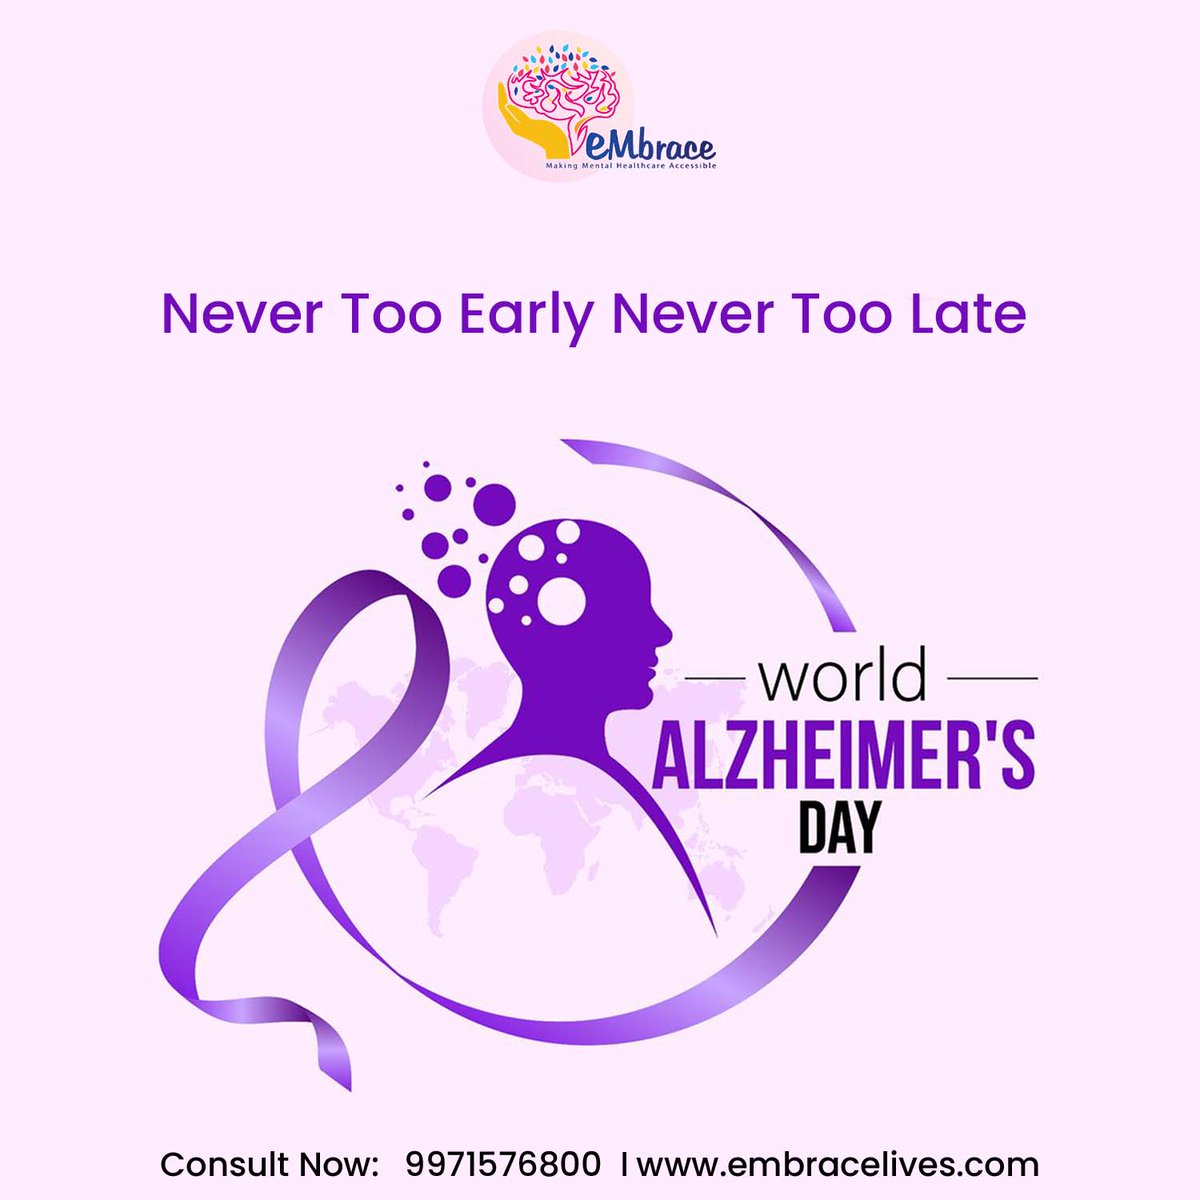 On this World Alzheimer's Day, we're reminded that it's never too early to care and never too late to make a change. 💜

Let's stand united against Alzheimer's. 🌼💙 

#ENDALZ  #NeverTooEarlyNeverTooLate #worldalzheimersday #mentalhealththerapy #eMbracelives #delhi